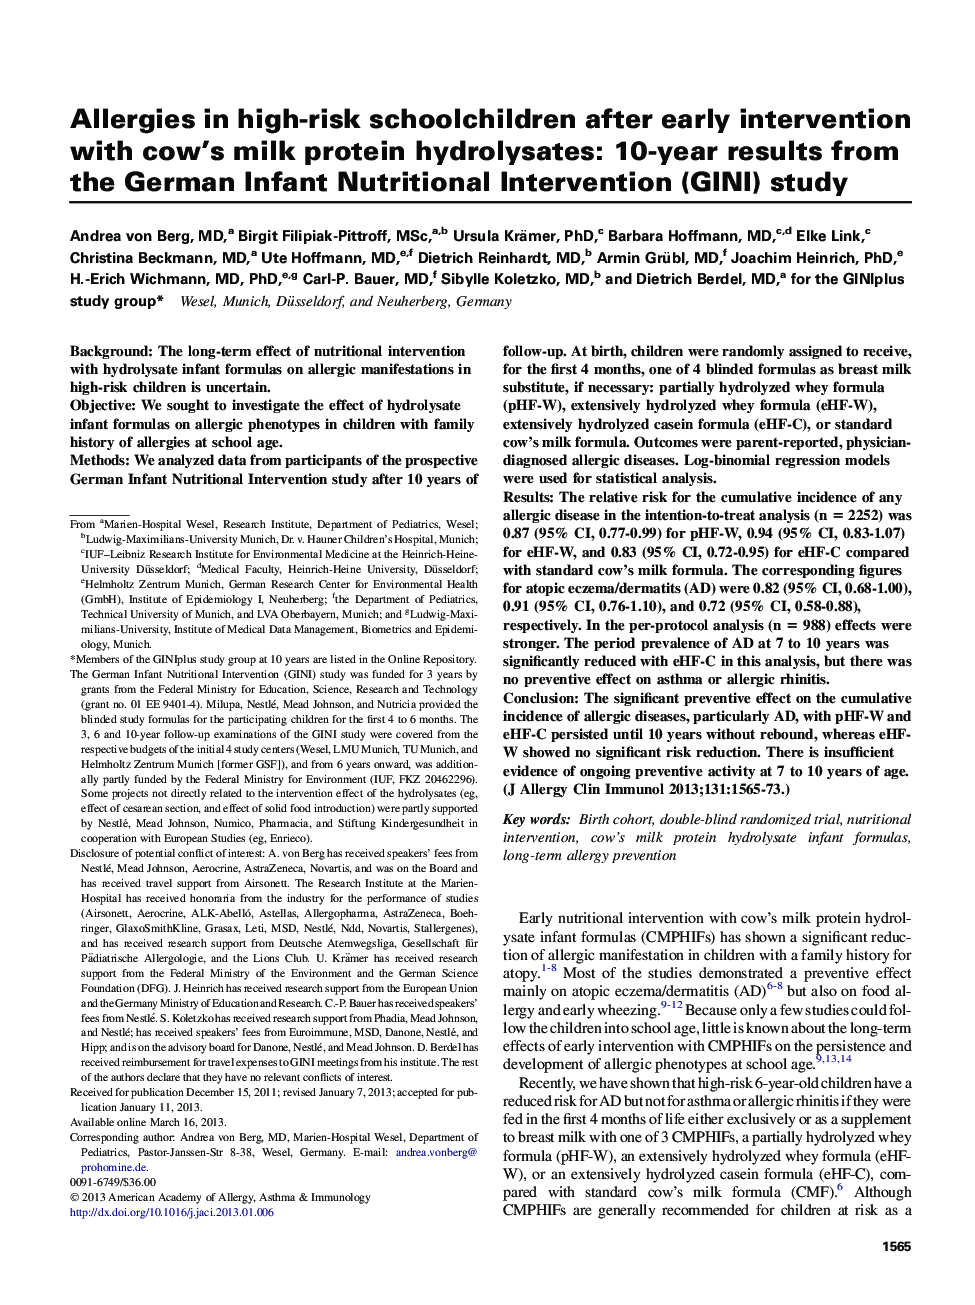 Allergies in high-risk schoolchildren after early intervention with cow's milk protein hydrolysates: 10-year results from the German Infant Nutritional Intervention (GINI) study